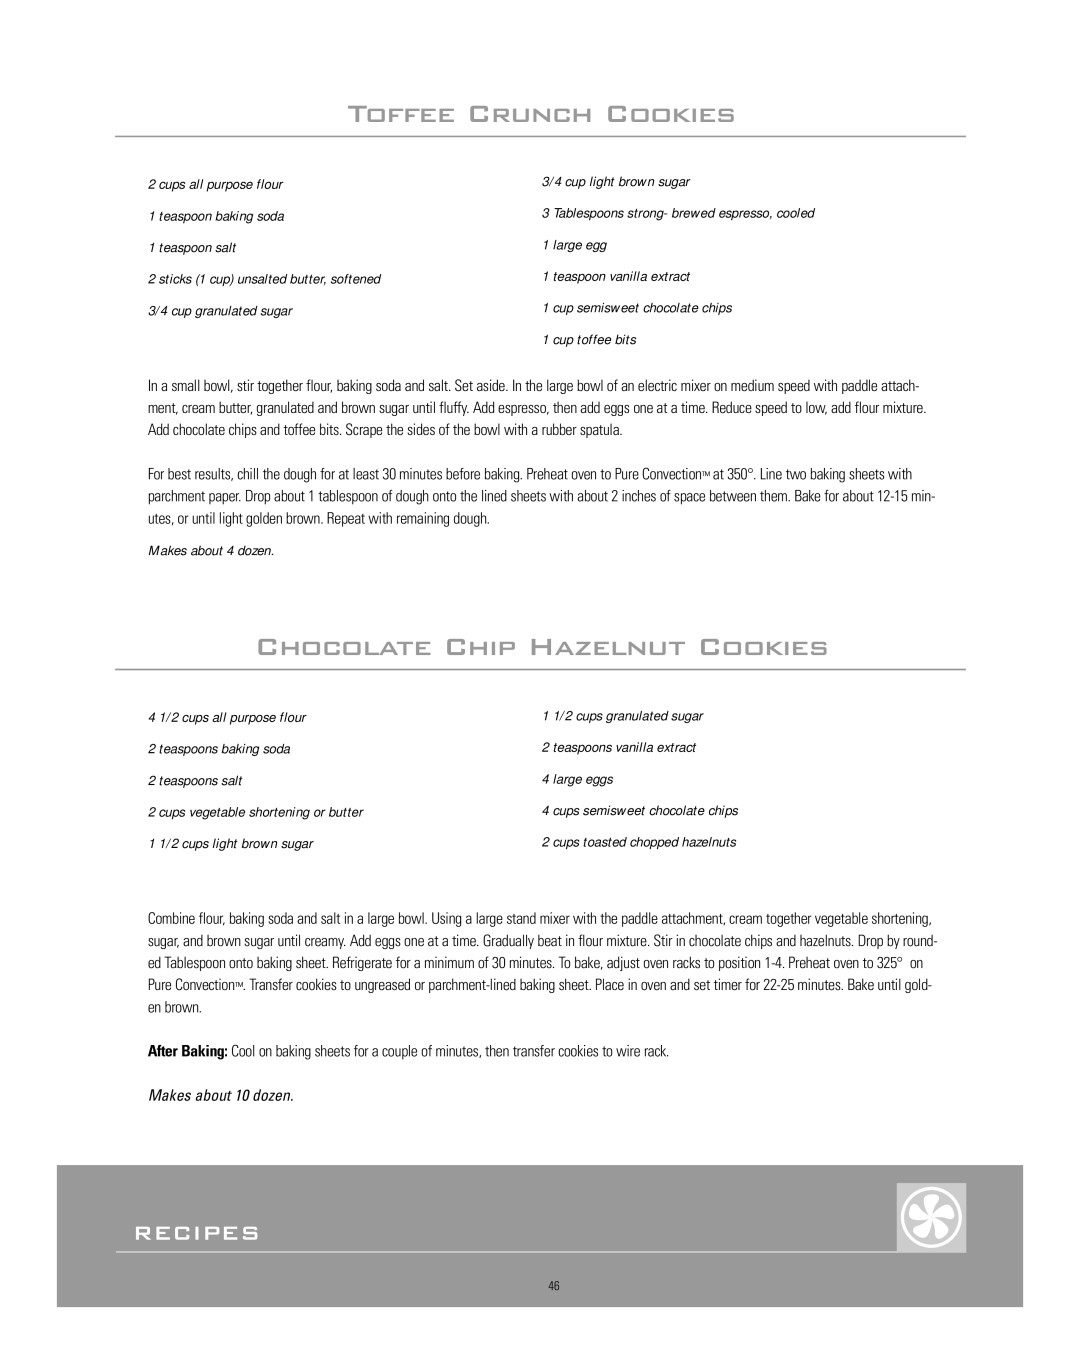 Dacor Range Cooking manual Toffee Crunch Cookies, Chocolate Chip Hazelnut Cookies, Recipes 